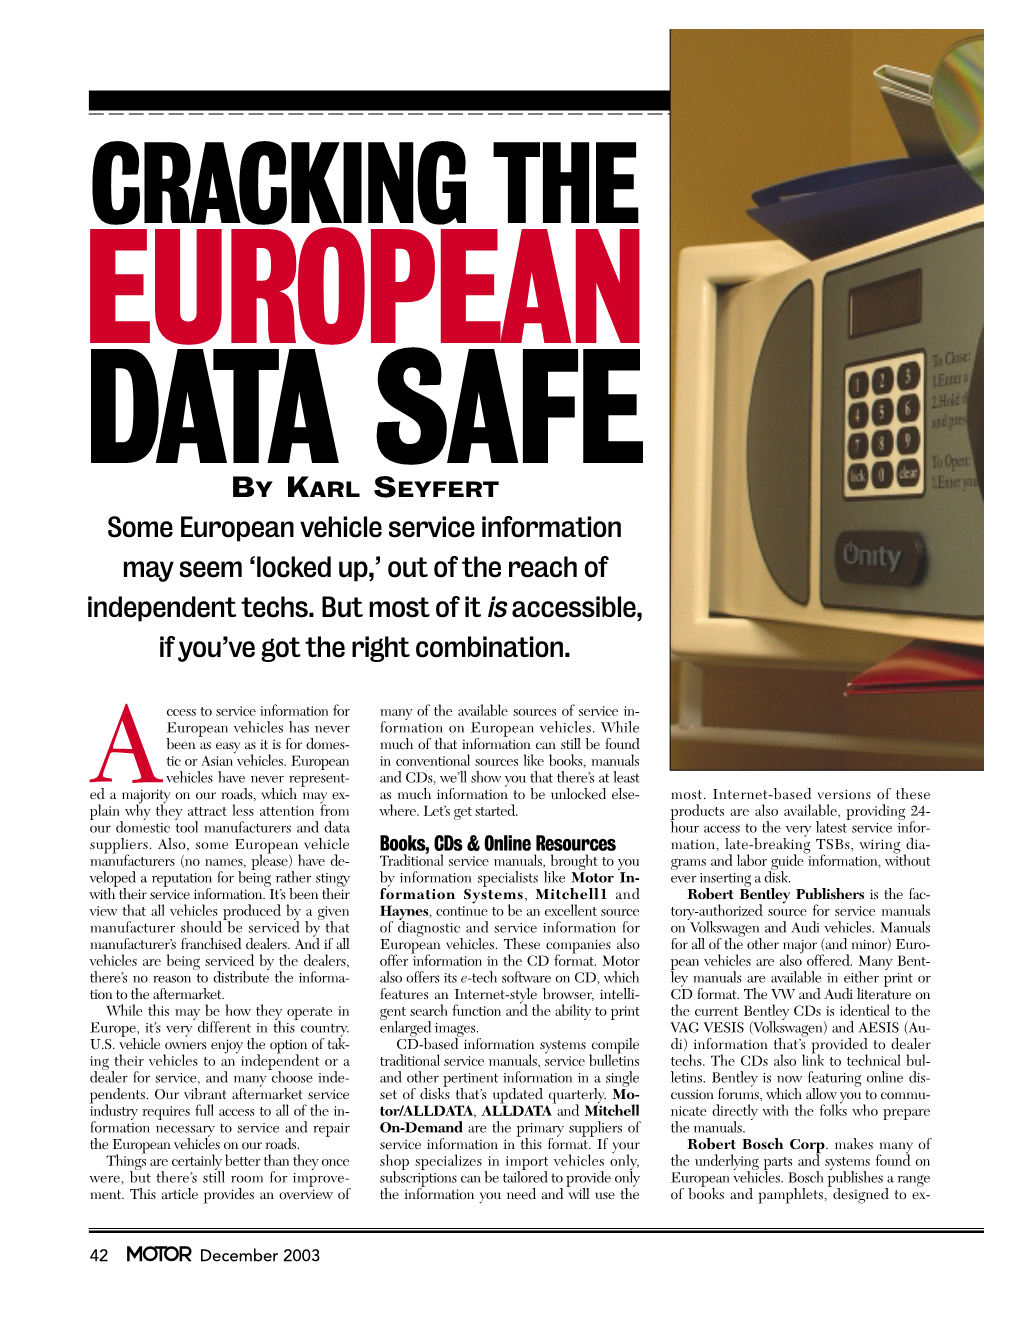 CRACKING the EUROPEAN DATA SAFE by KARL SEYFERT Some European Vehicle Service Information May Seem ‘Locked Up,’ out of the Reach of Independent Techs